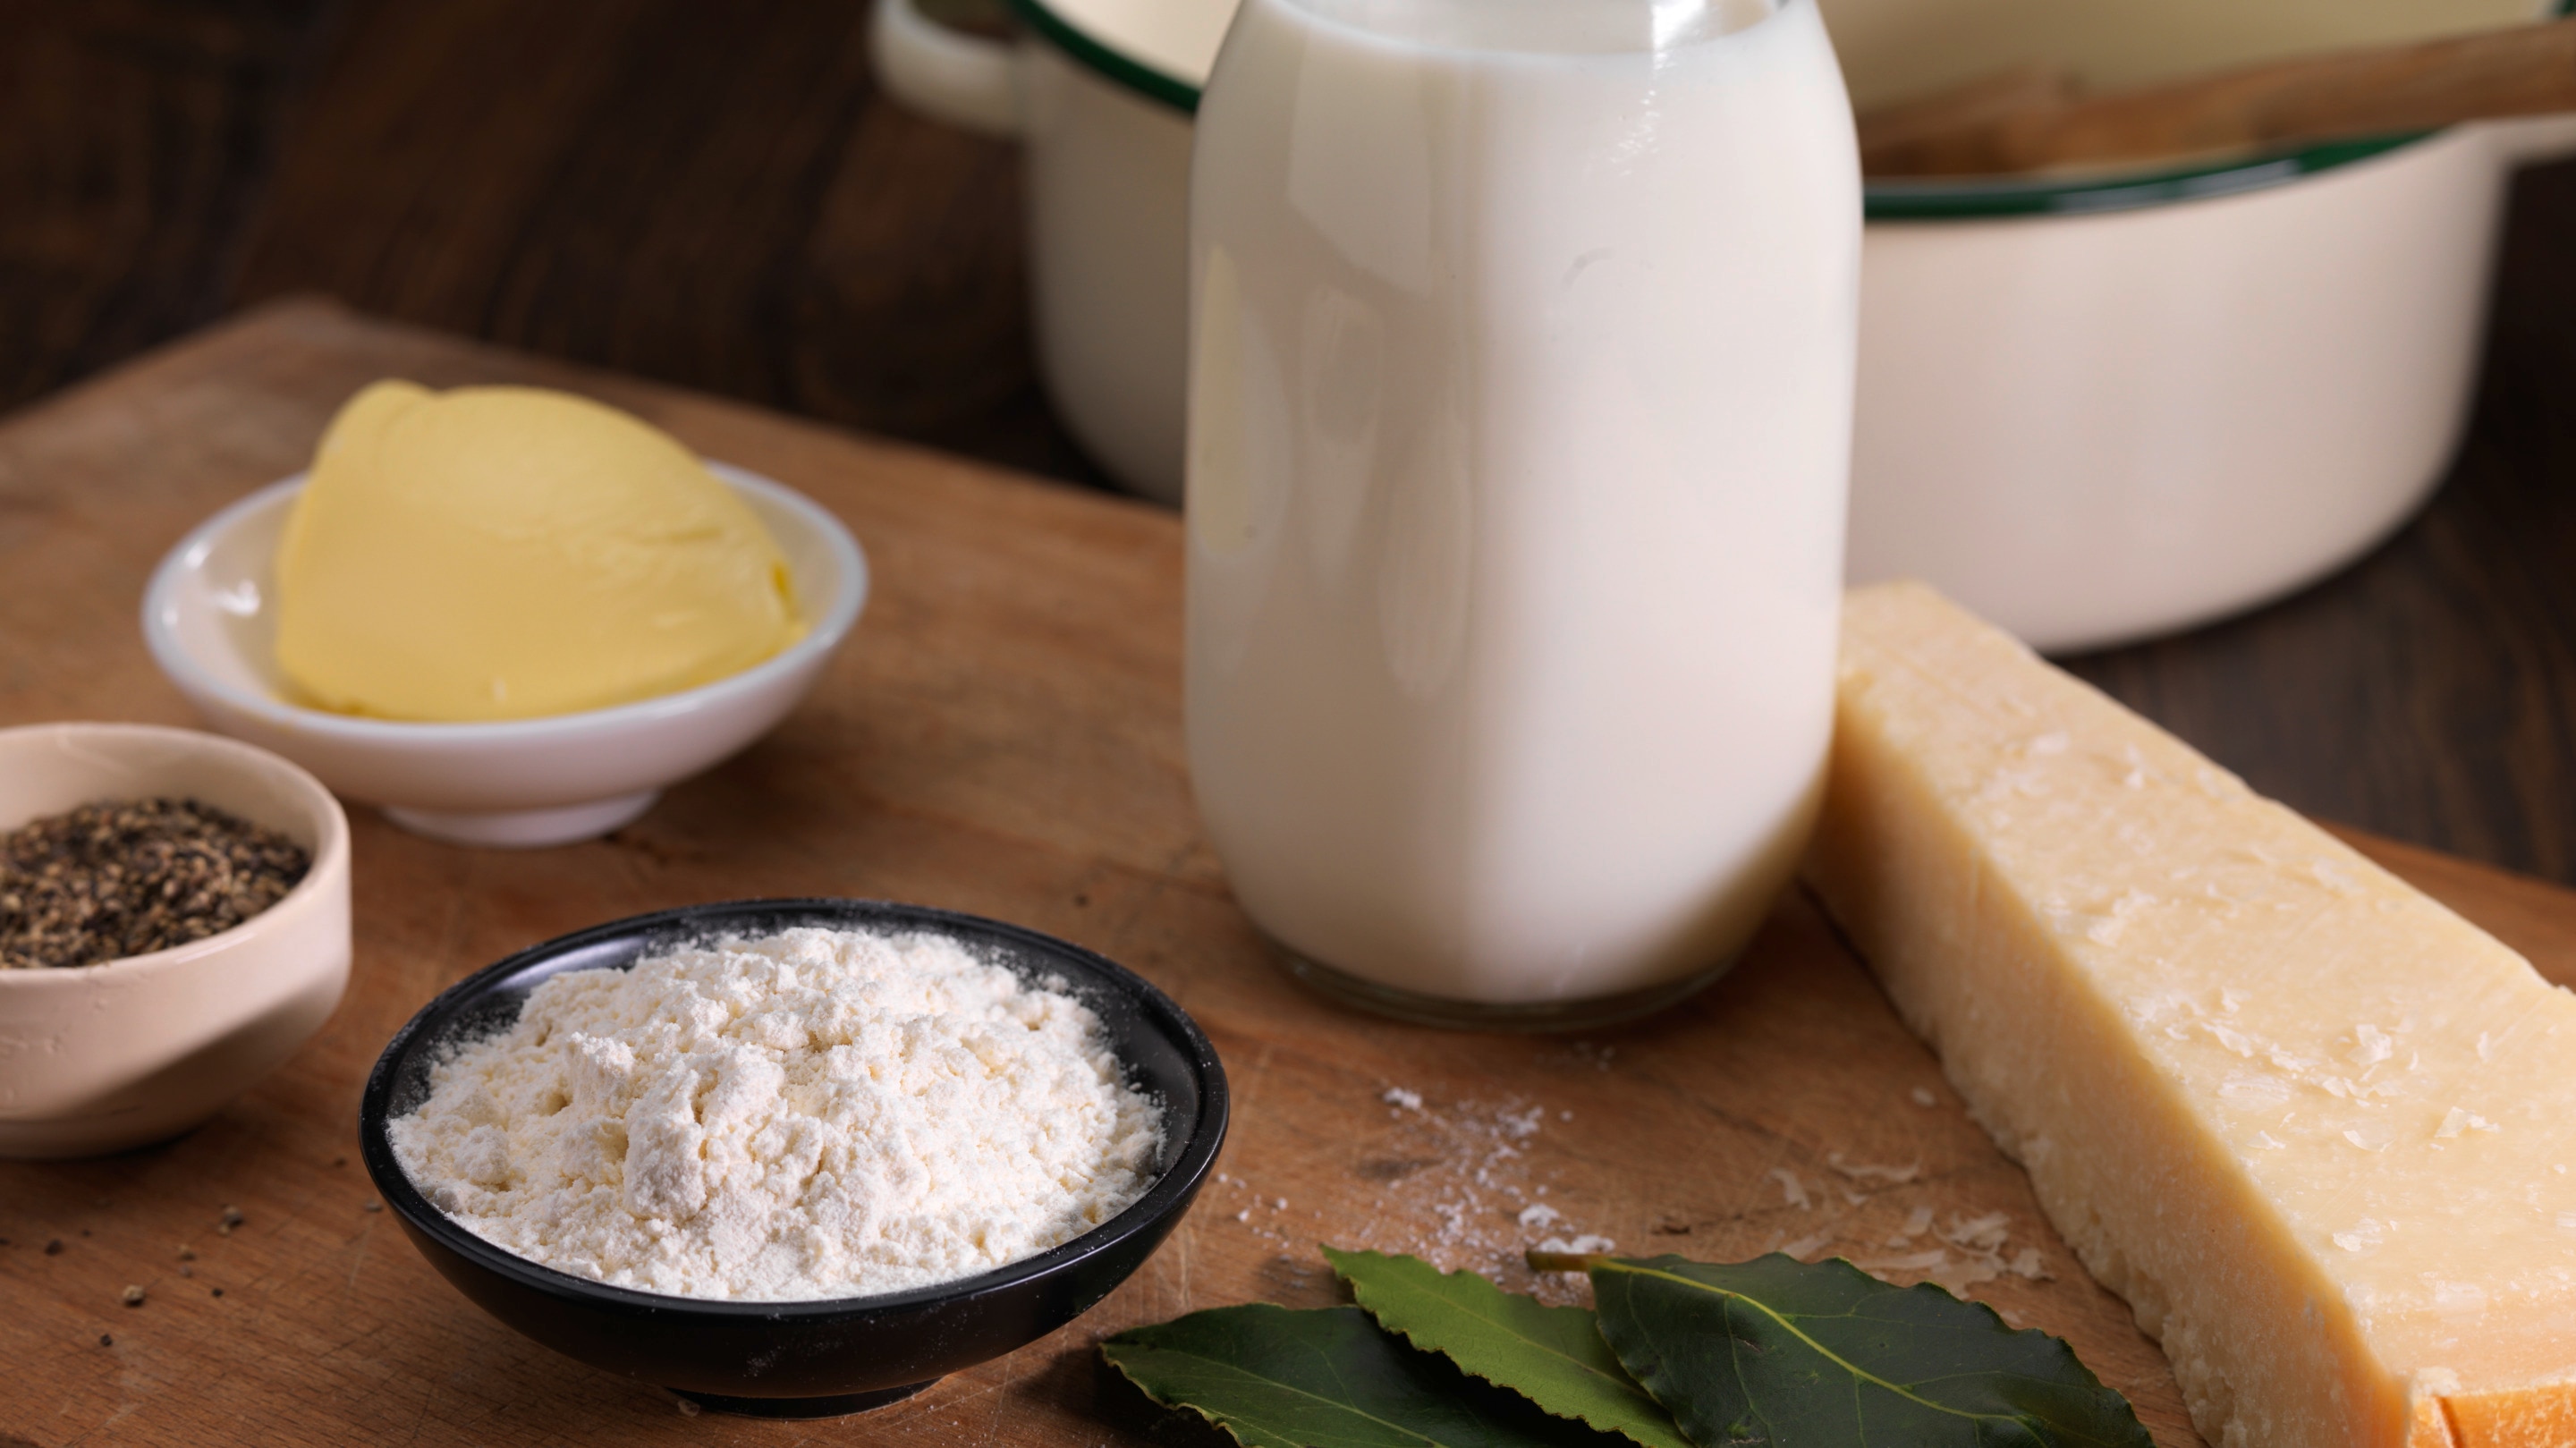 Raw ingredients (cheese, milk, flour, butter) for bechamel sauce on wooden surface.